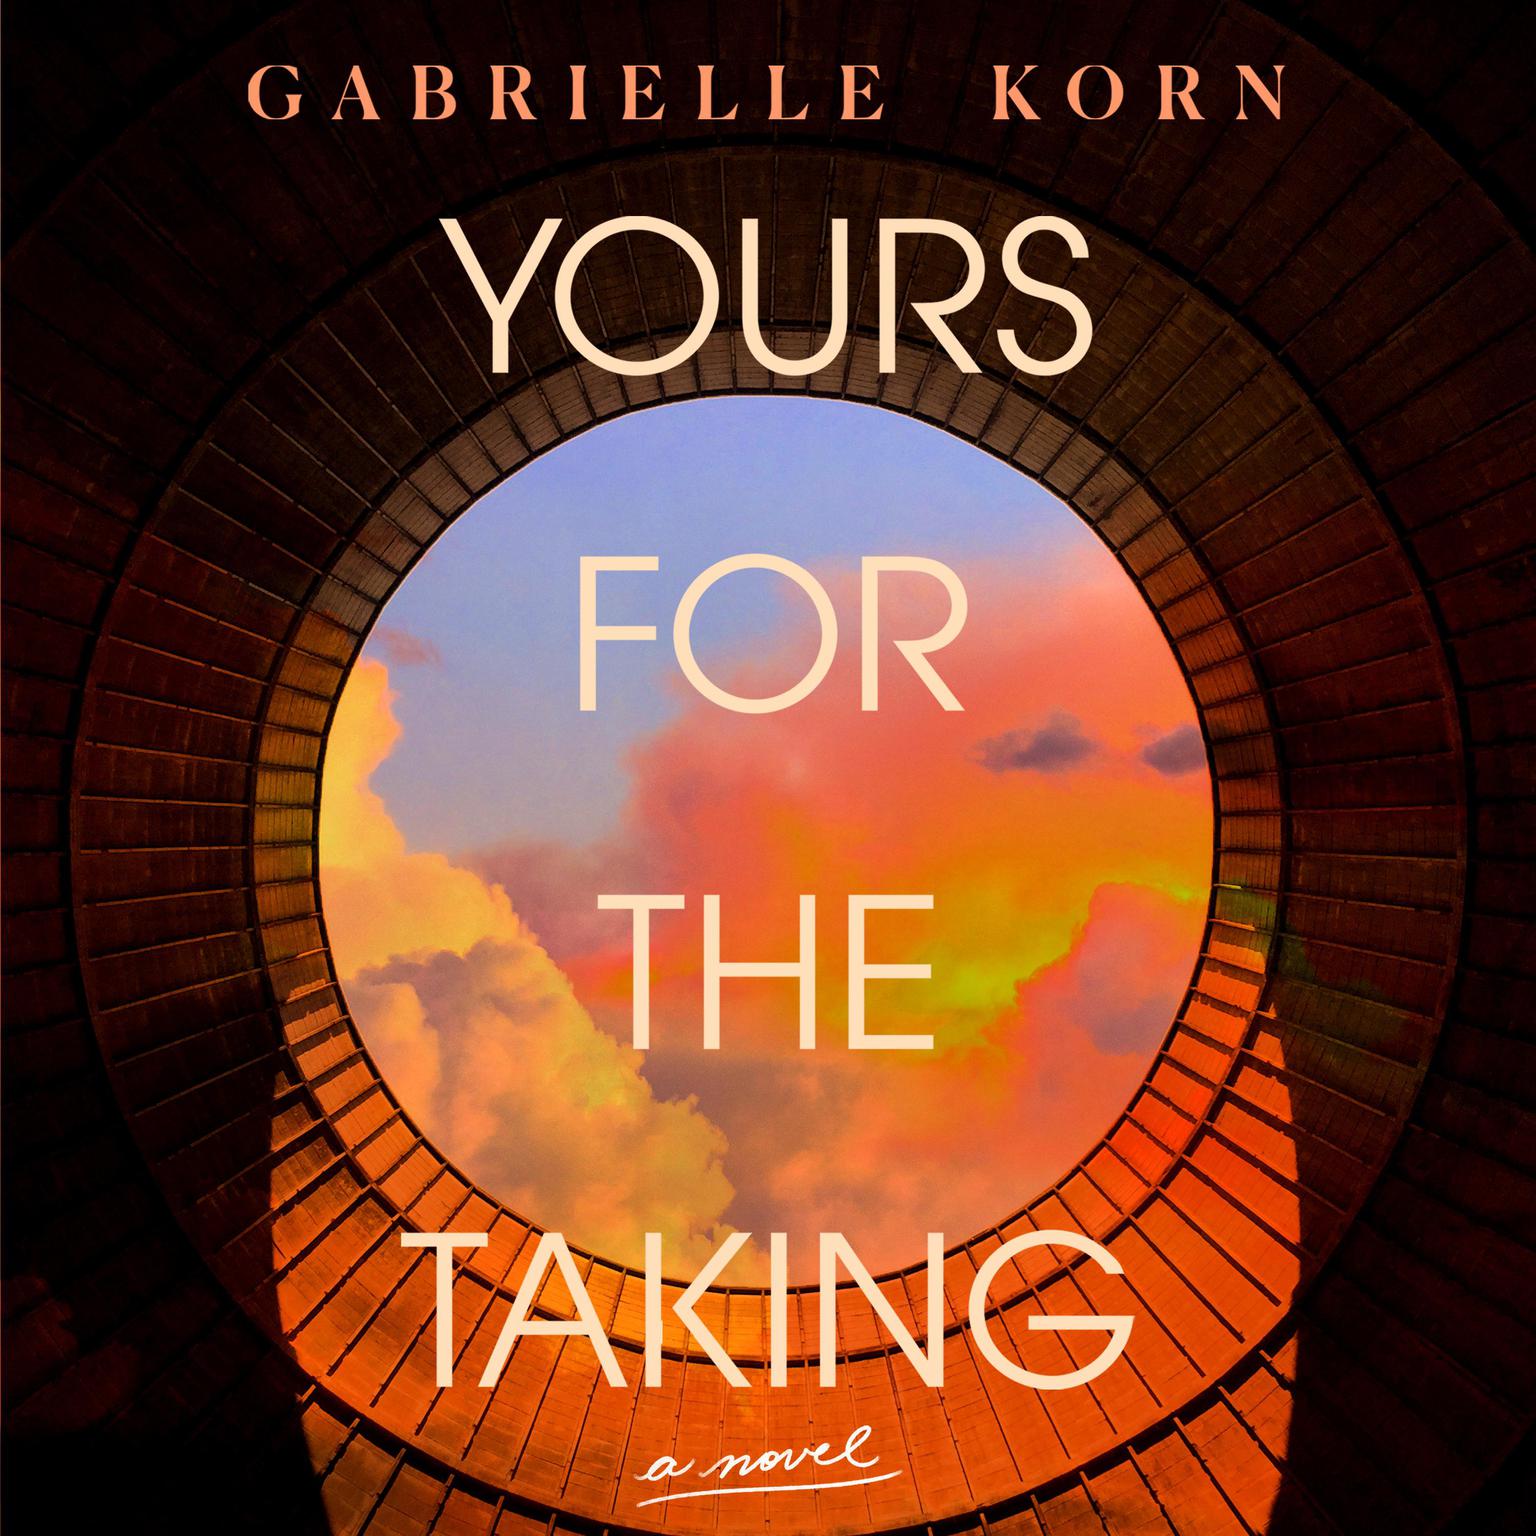 Yours for the Taking: A Novel Audiobook, by Gabrielle Korn